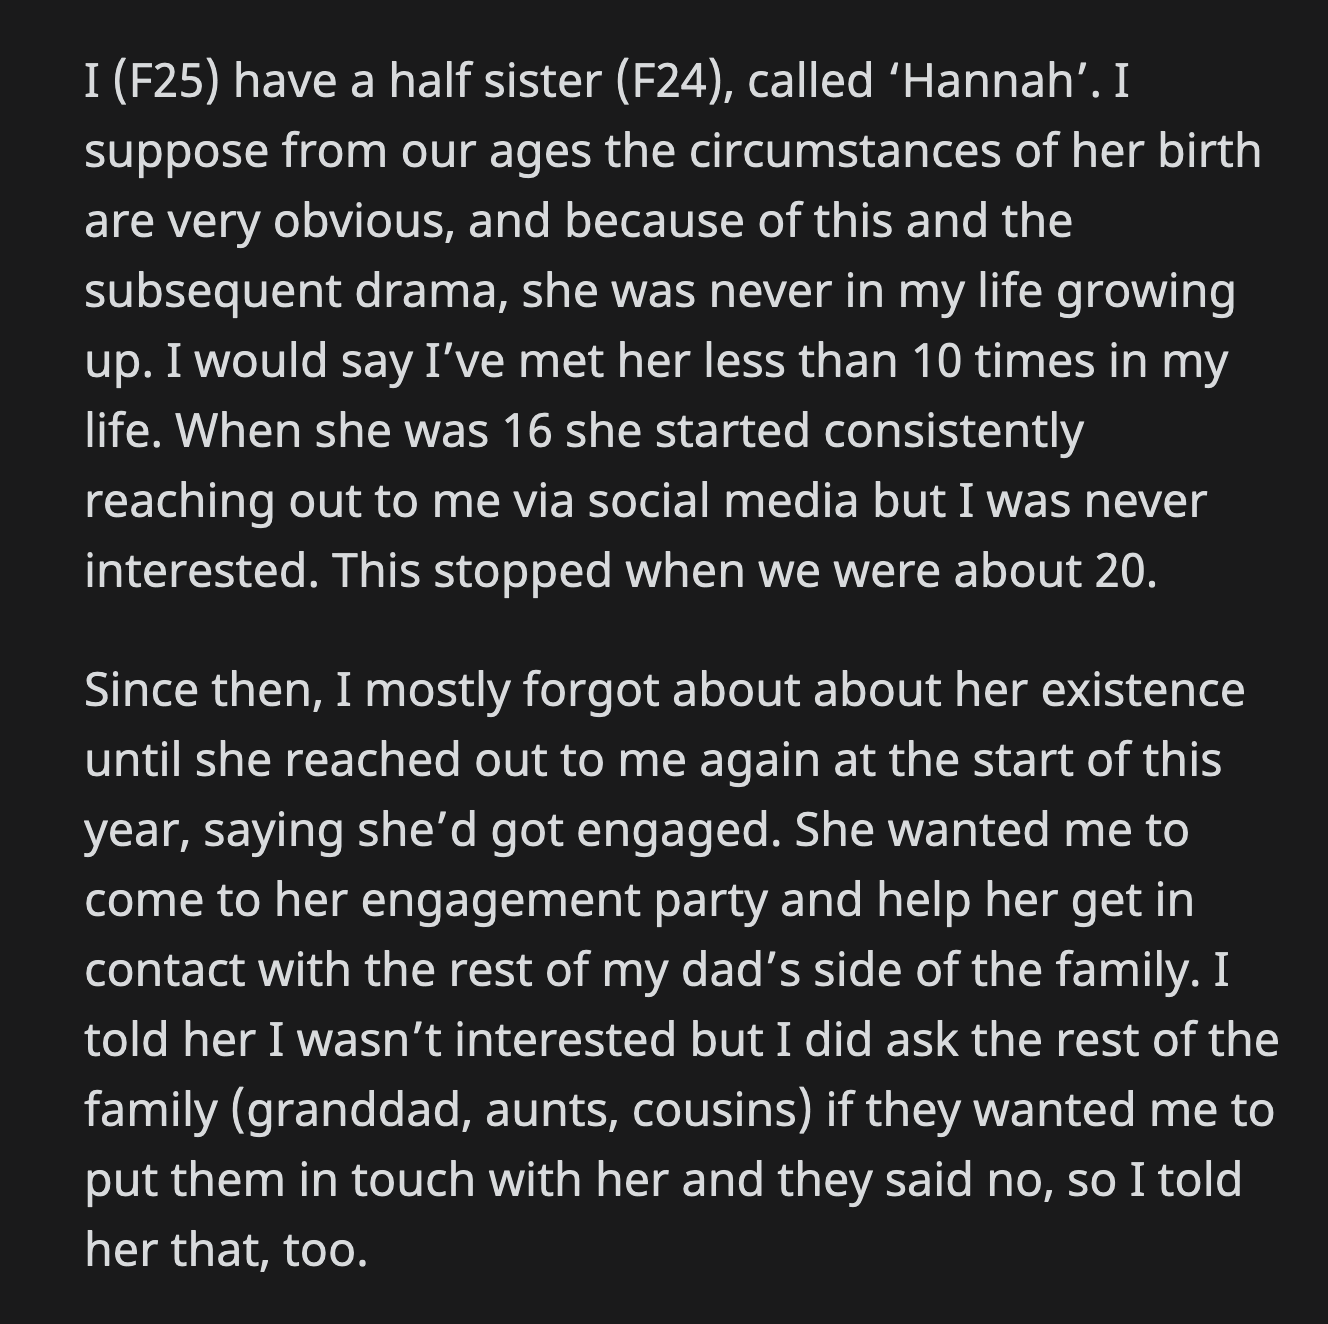 She co-opted the life that OP lived. She talked about OP's life as if it was hers. OP didn't engage and told her sister to stop lying, or else she would tell her future in-laws the truth.